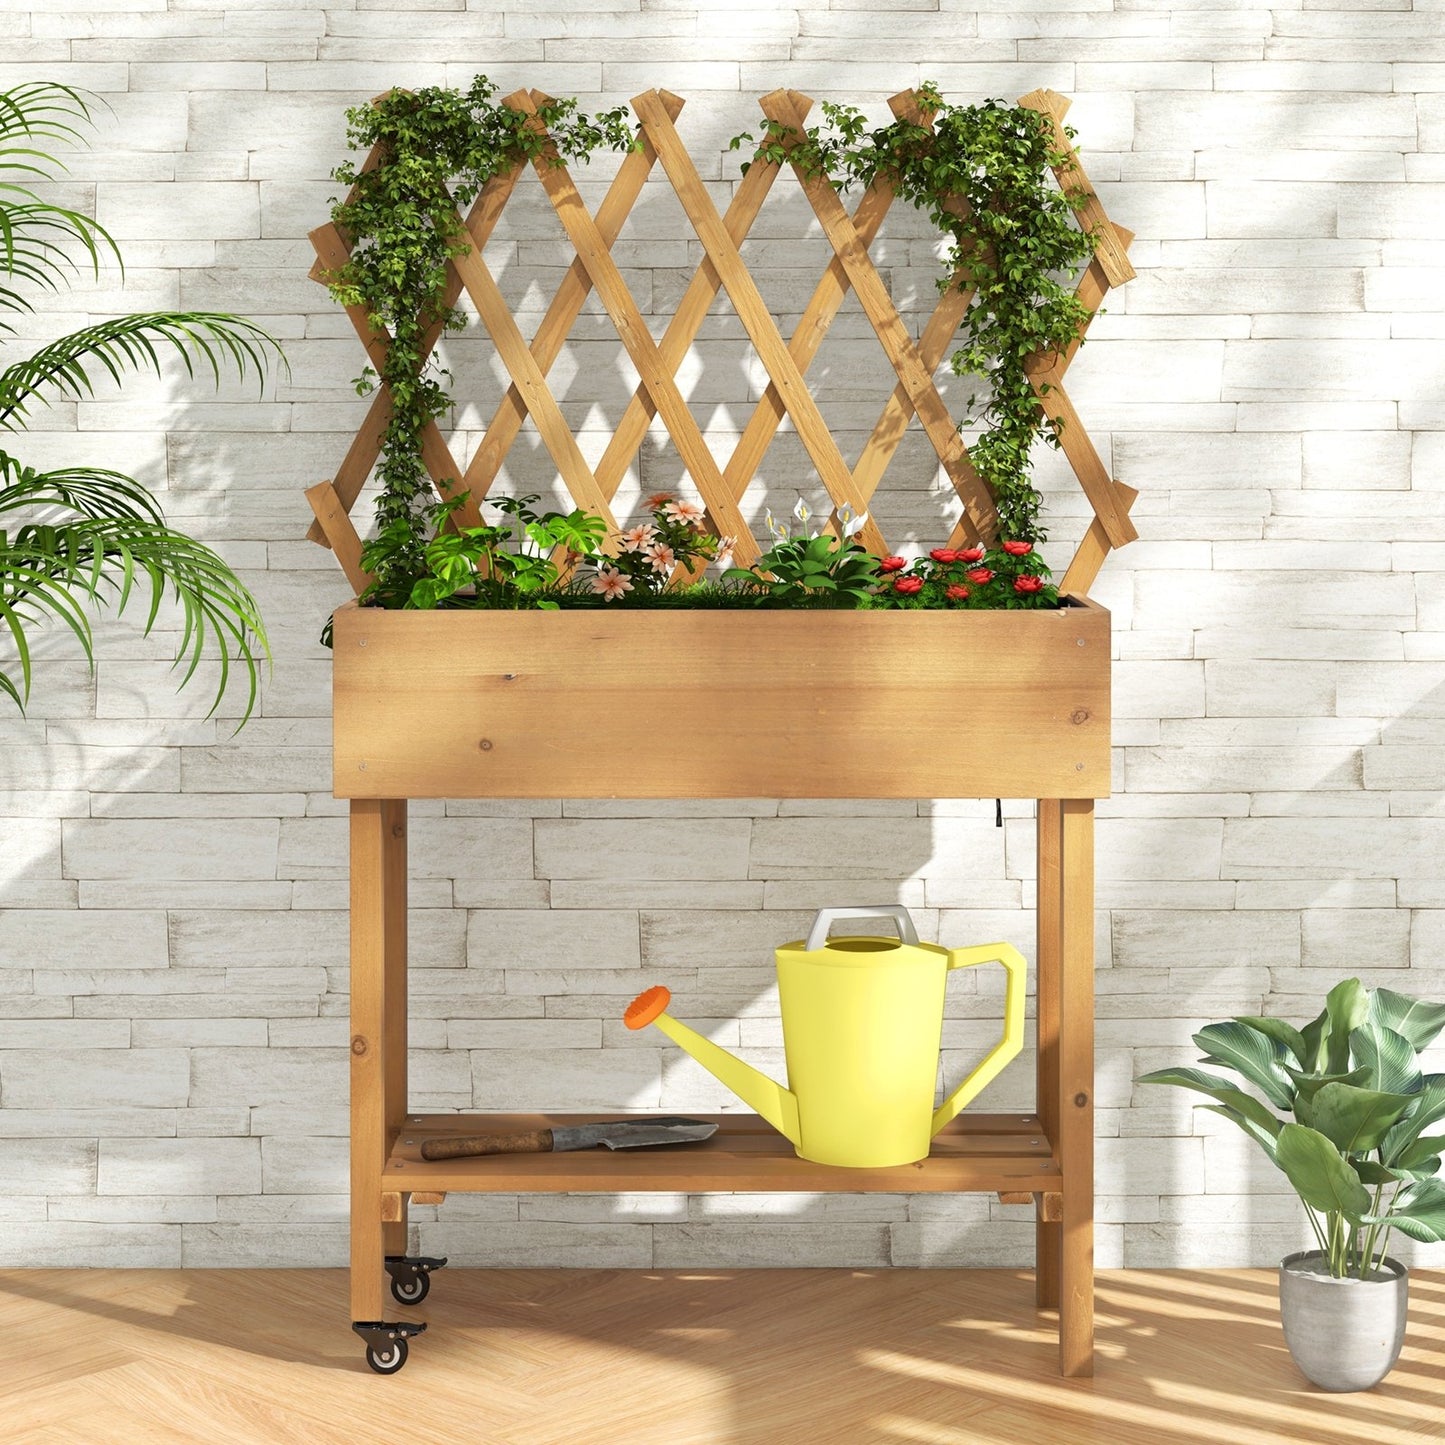 Wooden Raised Garden Bed Mobile Elevated Planter Box with Trellis, Natural